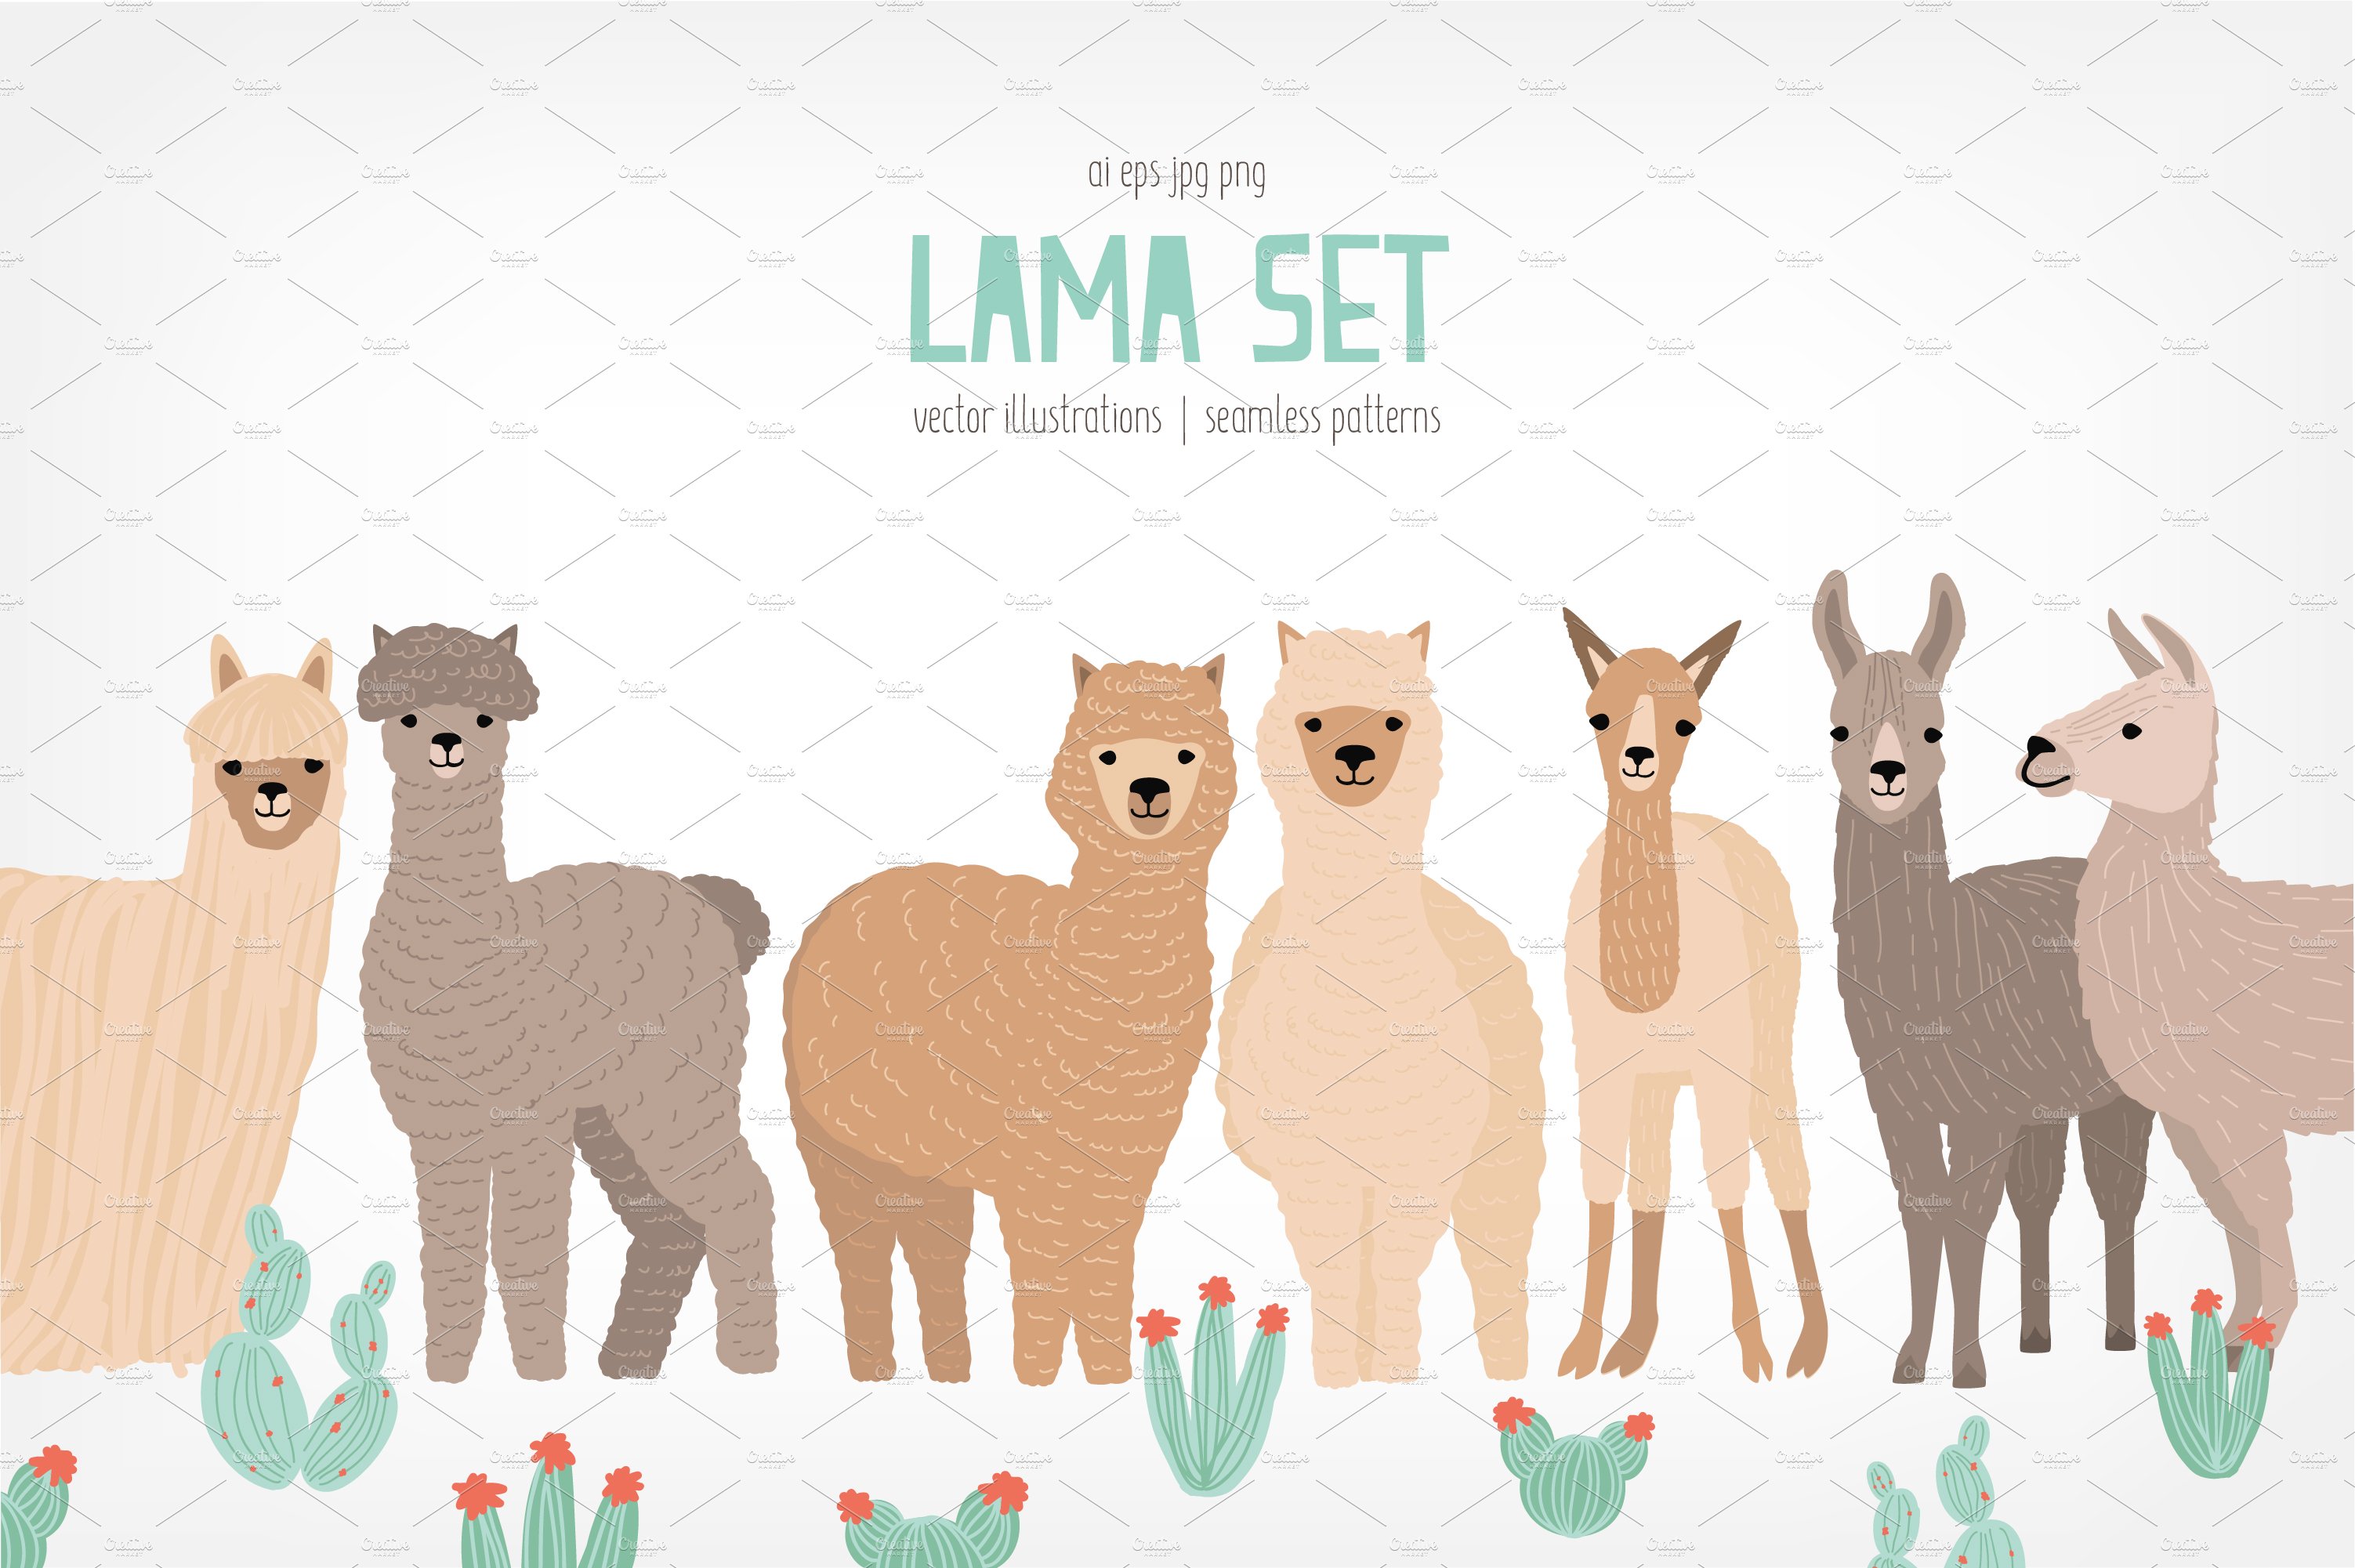 Adorable llamas and cactuses cover image.